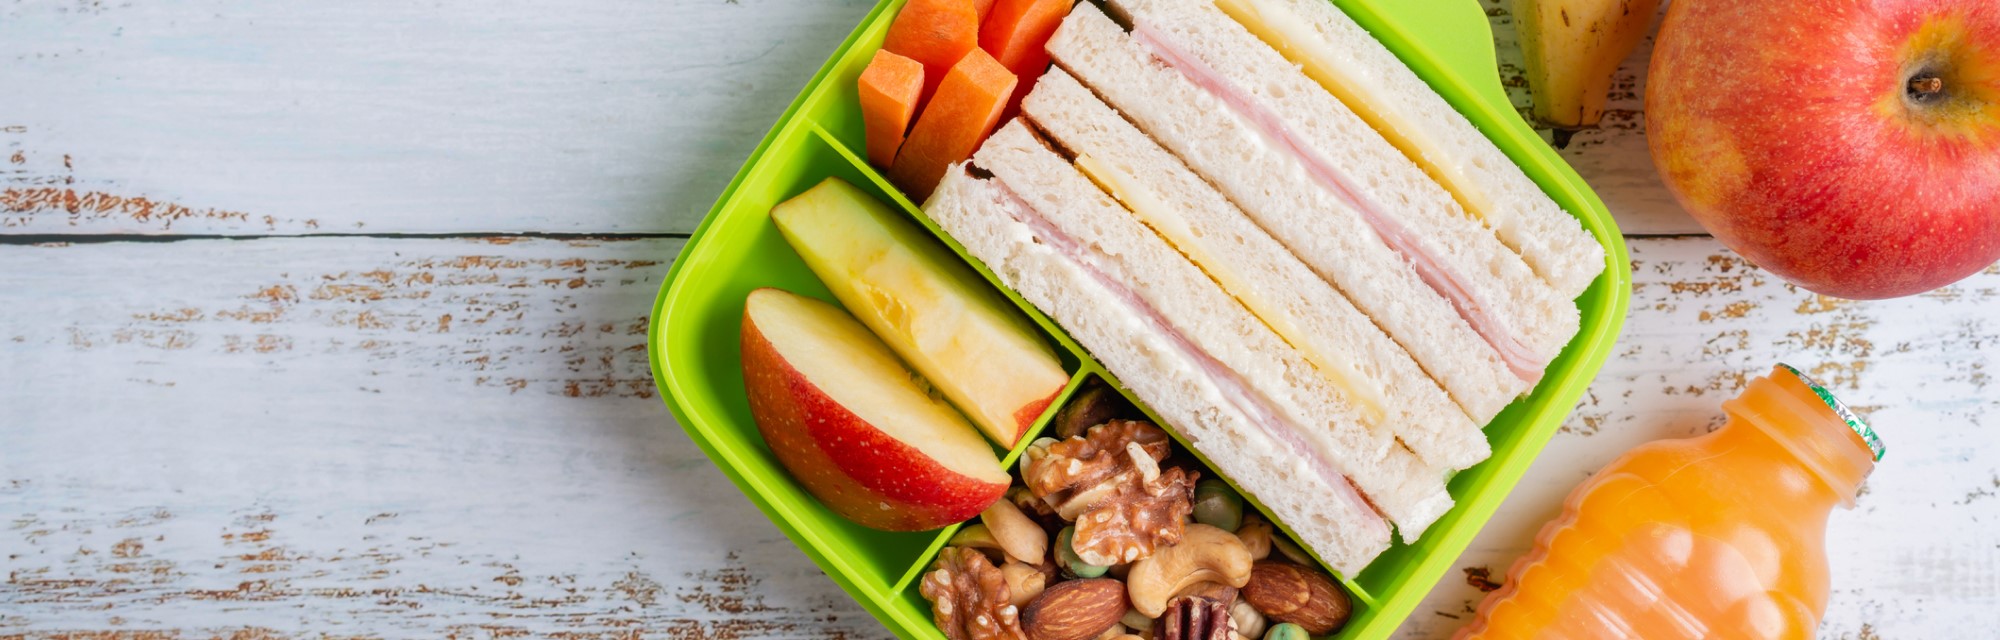 10 budget packed lunch ideas for kids